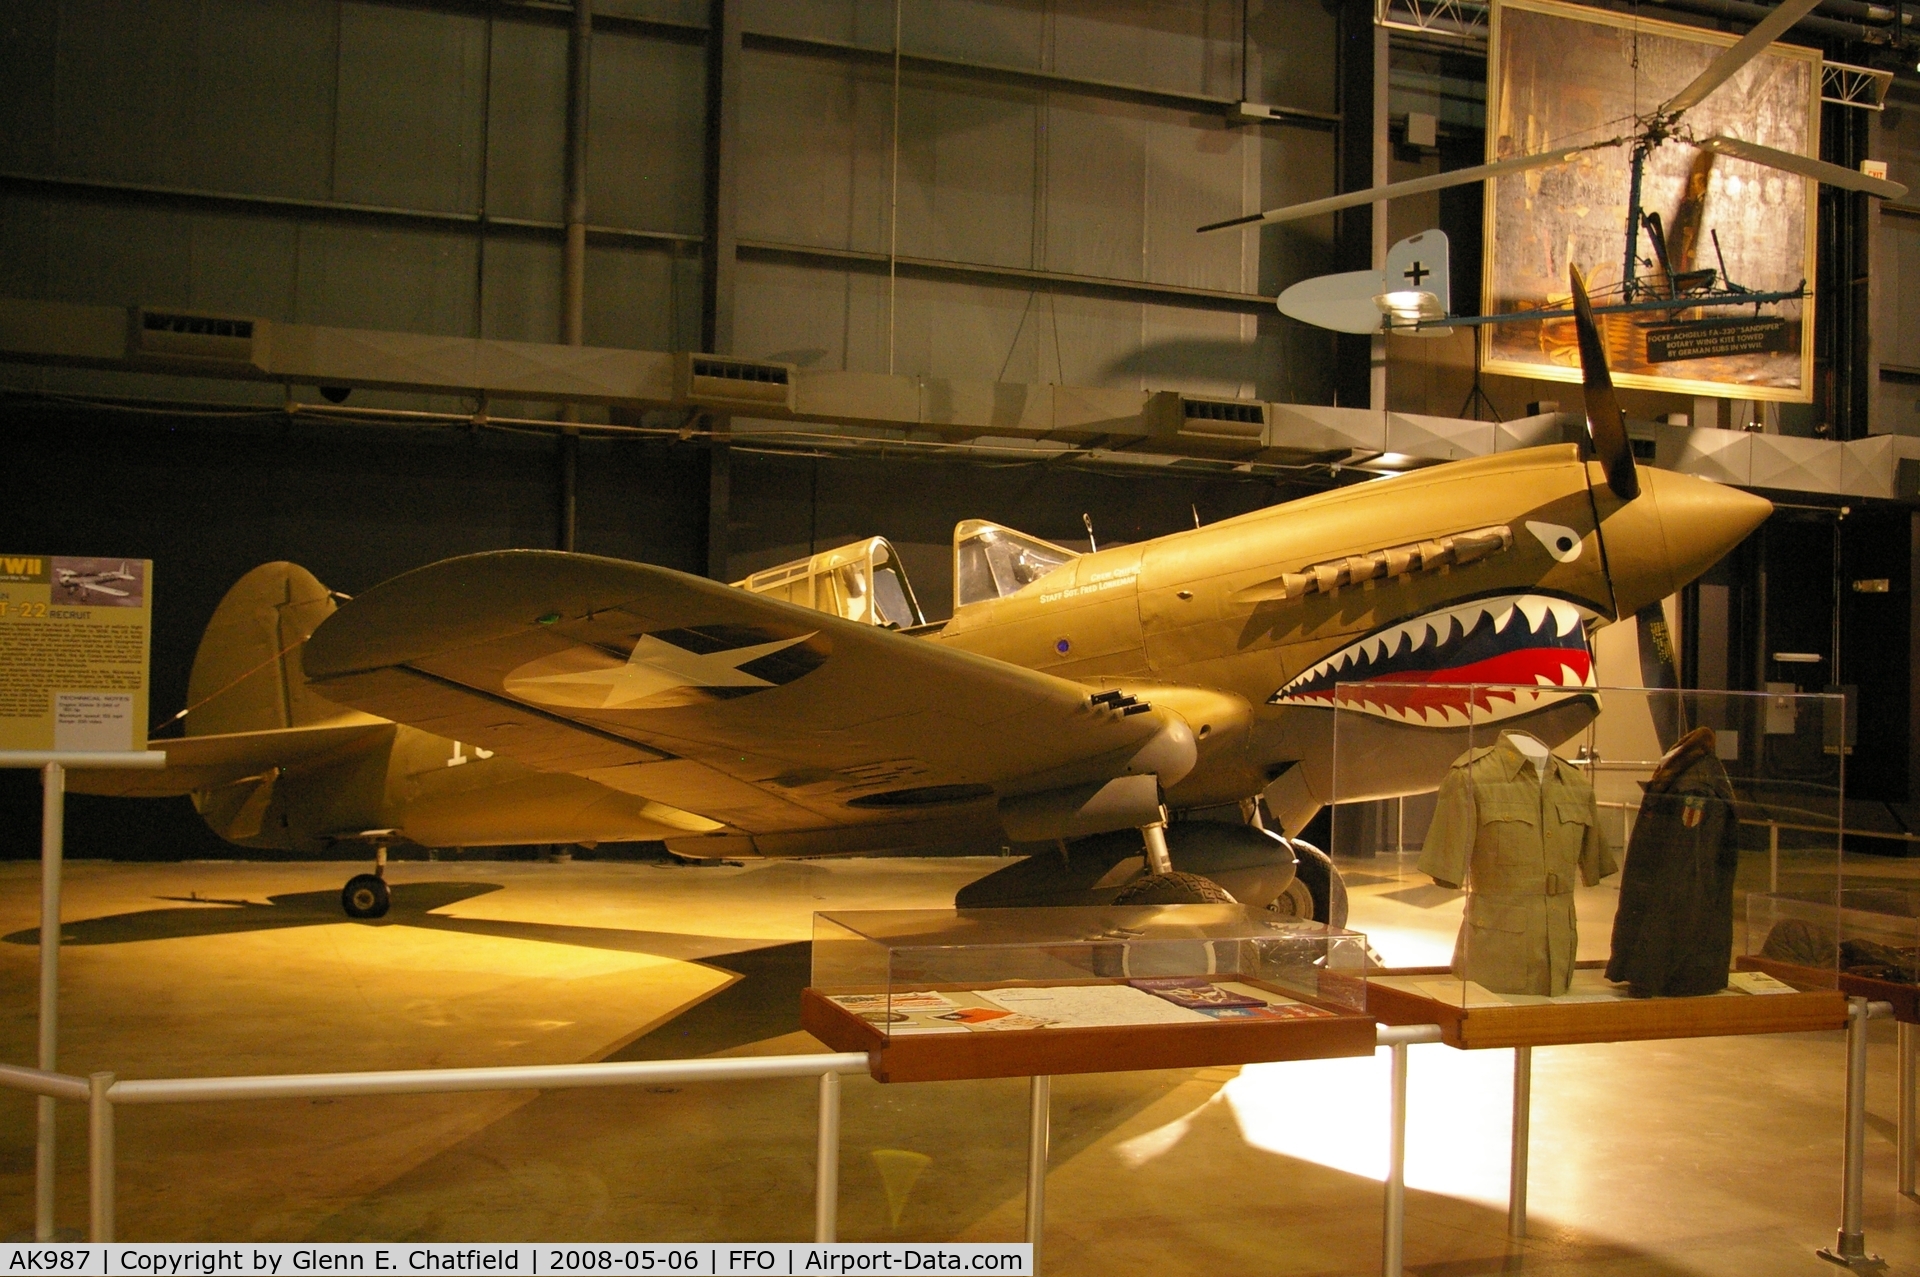 AK987, 1942 Curtiss P-40E Kittyhawk 1A C/N 18731, Displayed at the National Museum of the U.S. Air Force